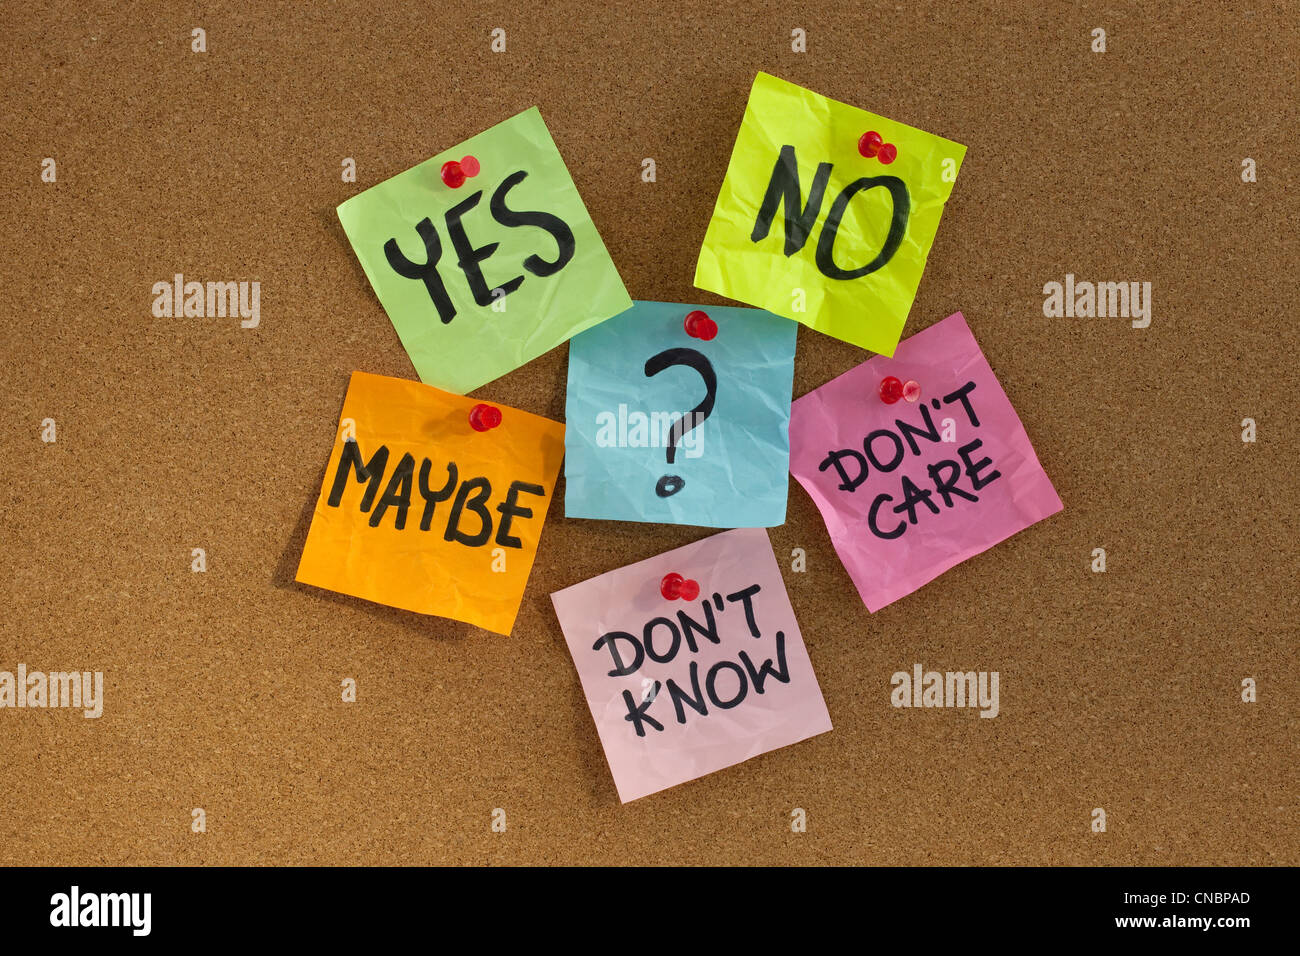 yes, no, maybe, ... undecided voter concept, colorful sticky notes on cork bulletin board Stock Photo